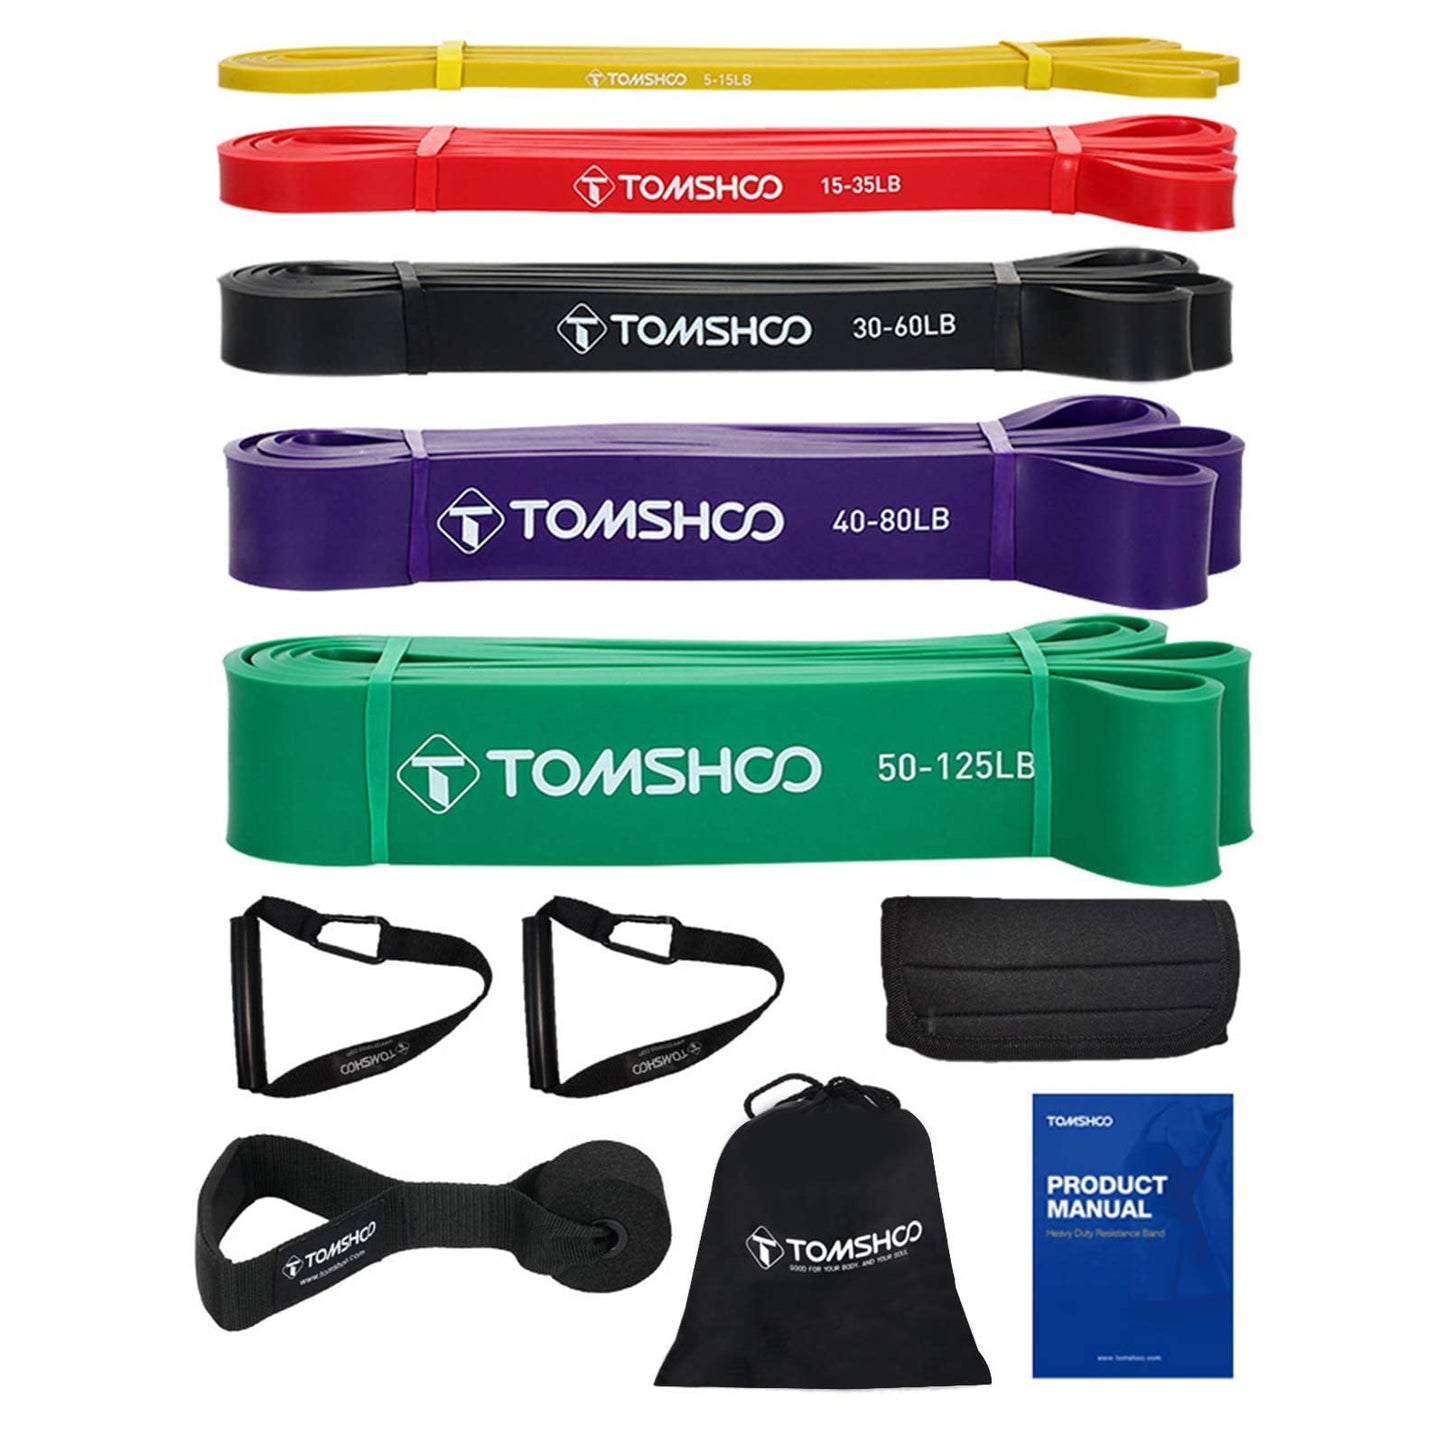 TOMSHOO Resistance Loop Bands, 5 Packs Pull Up Assist Bands Set Latex Skin-Friendly with Double Handles and Door Anchor, Workout Bands for Powerlifting CrossFit Stretching Gym Yoga Strength Training